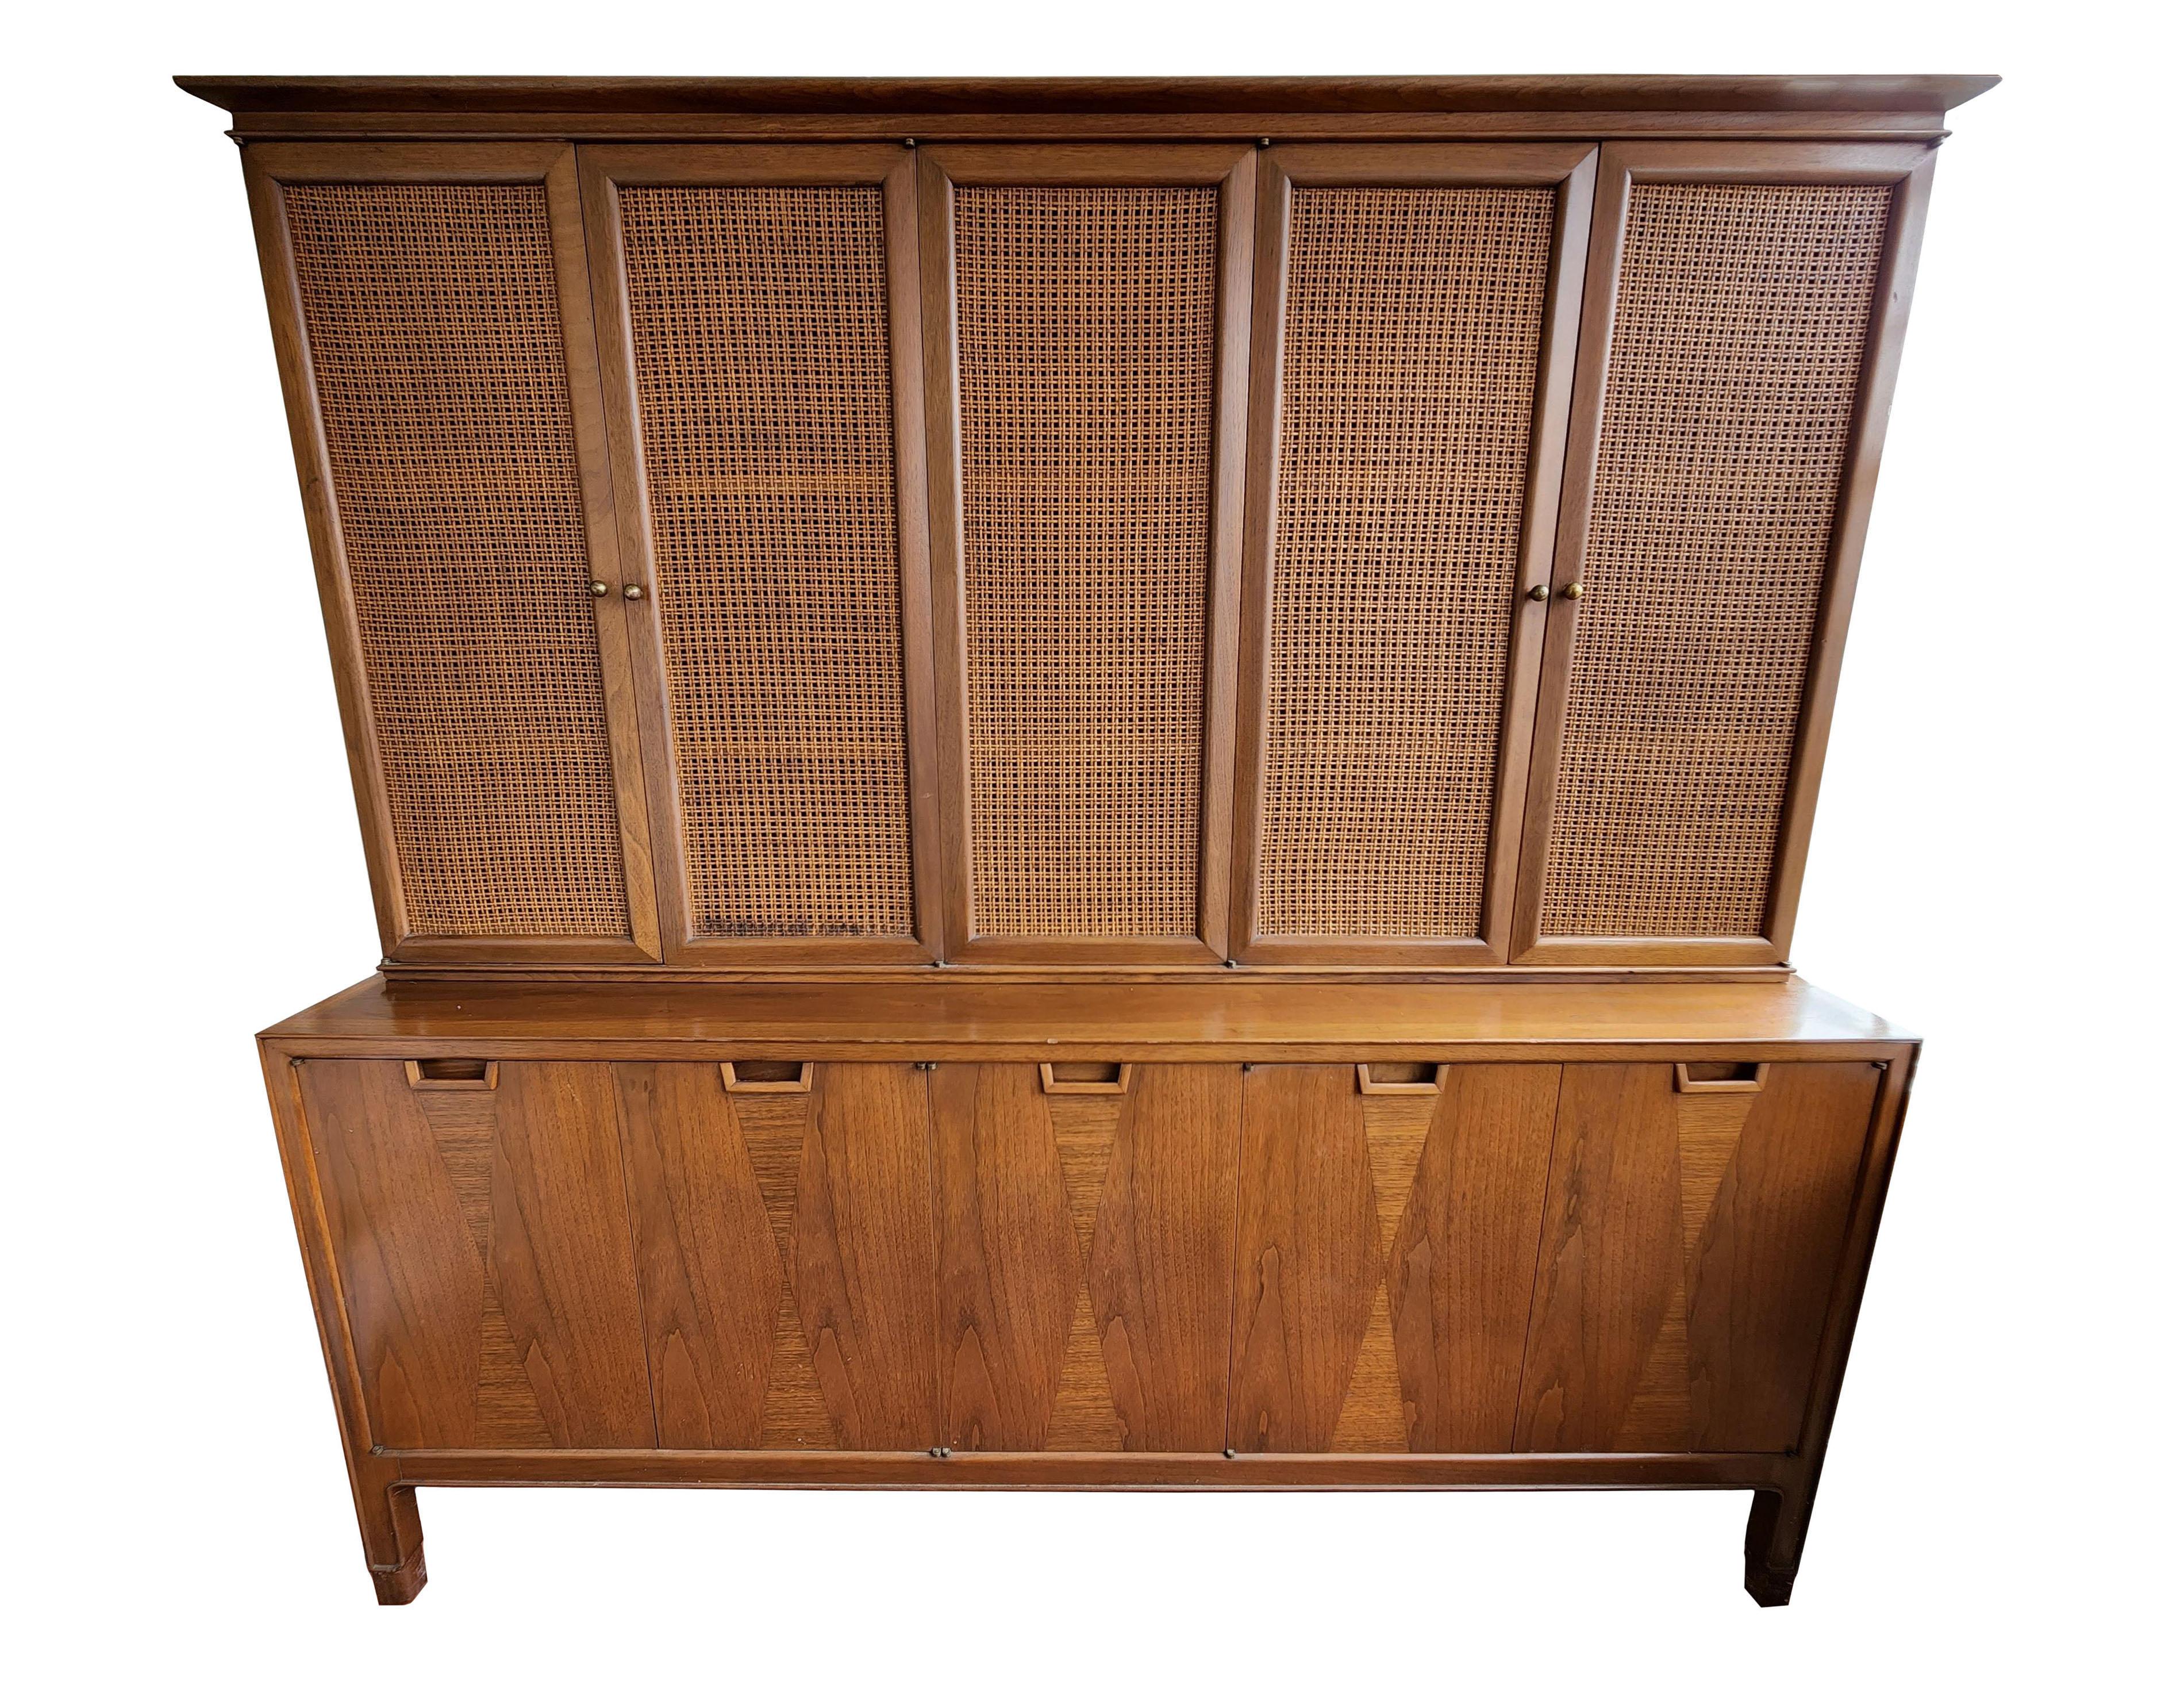 Rare Designer John Stuart for Mount Airy Lodge Sideboard

This is the definition of Mid-Century Modern. A true muted walnut finish so impressive of that era. An important historical piece captured in time, when life was good, a throwback to some